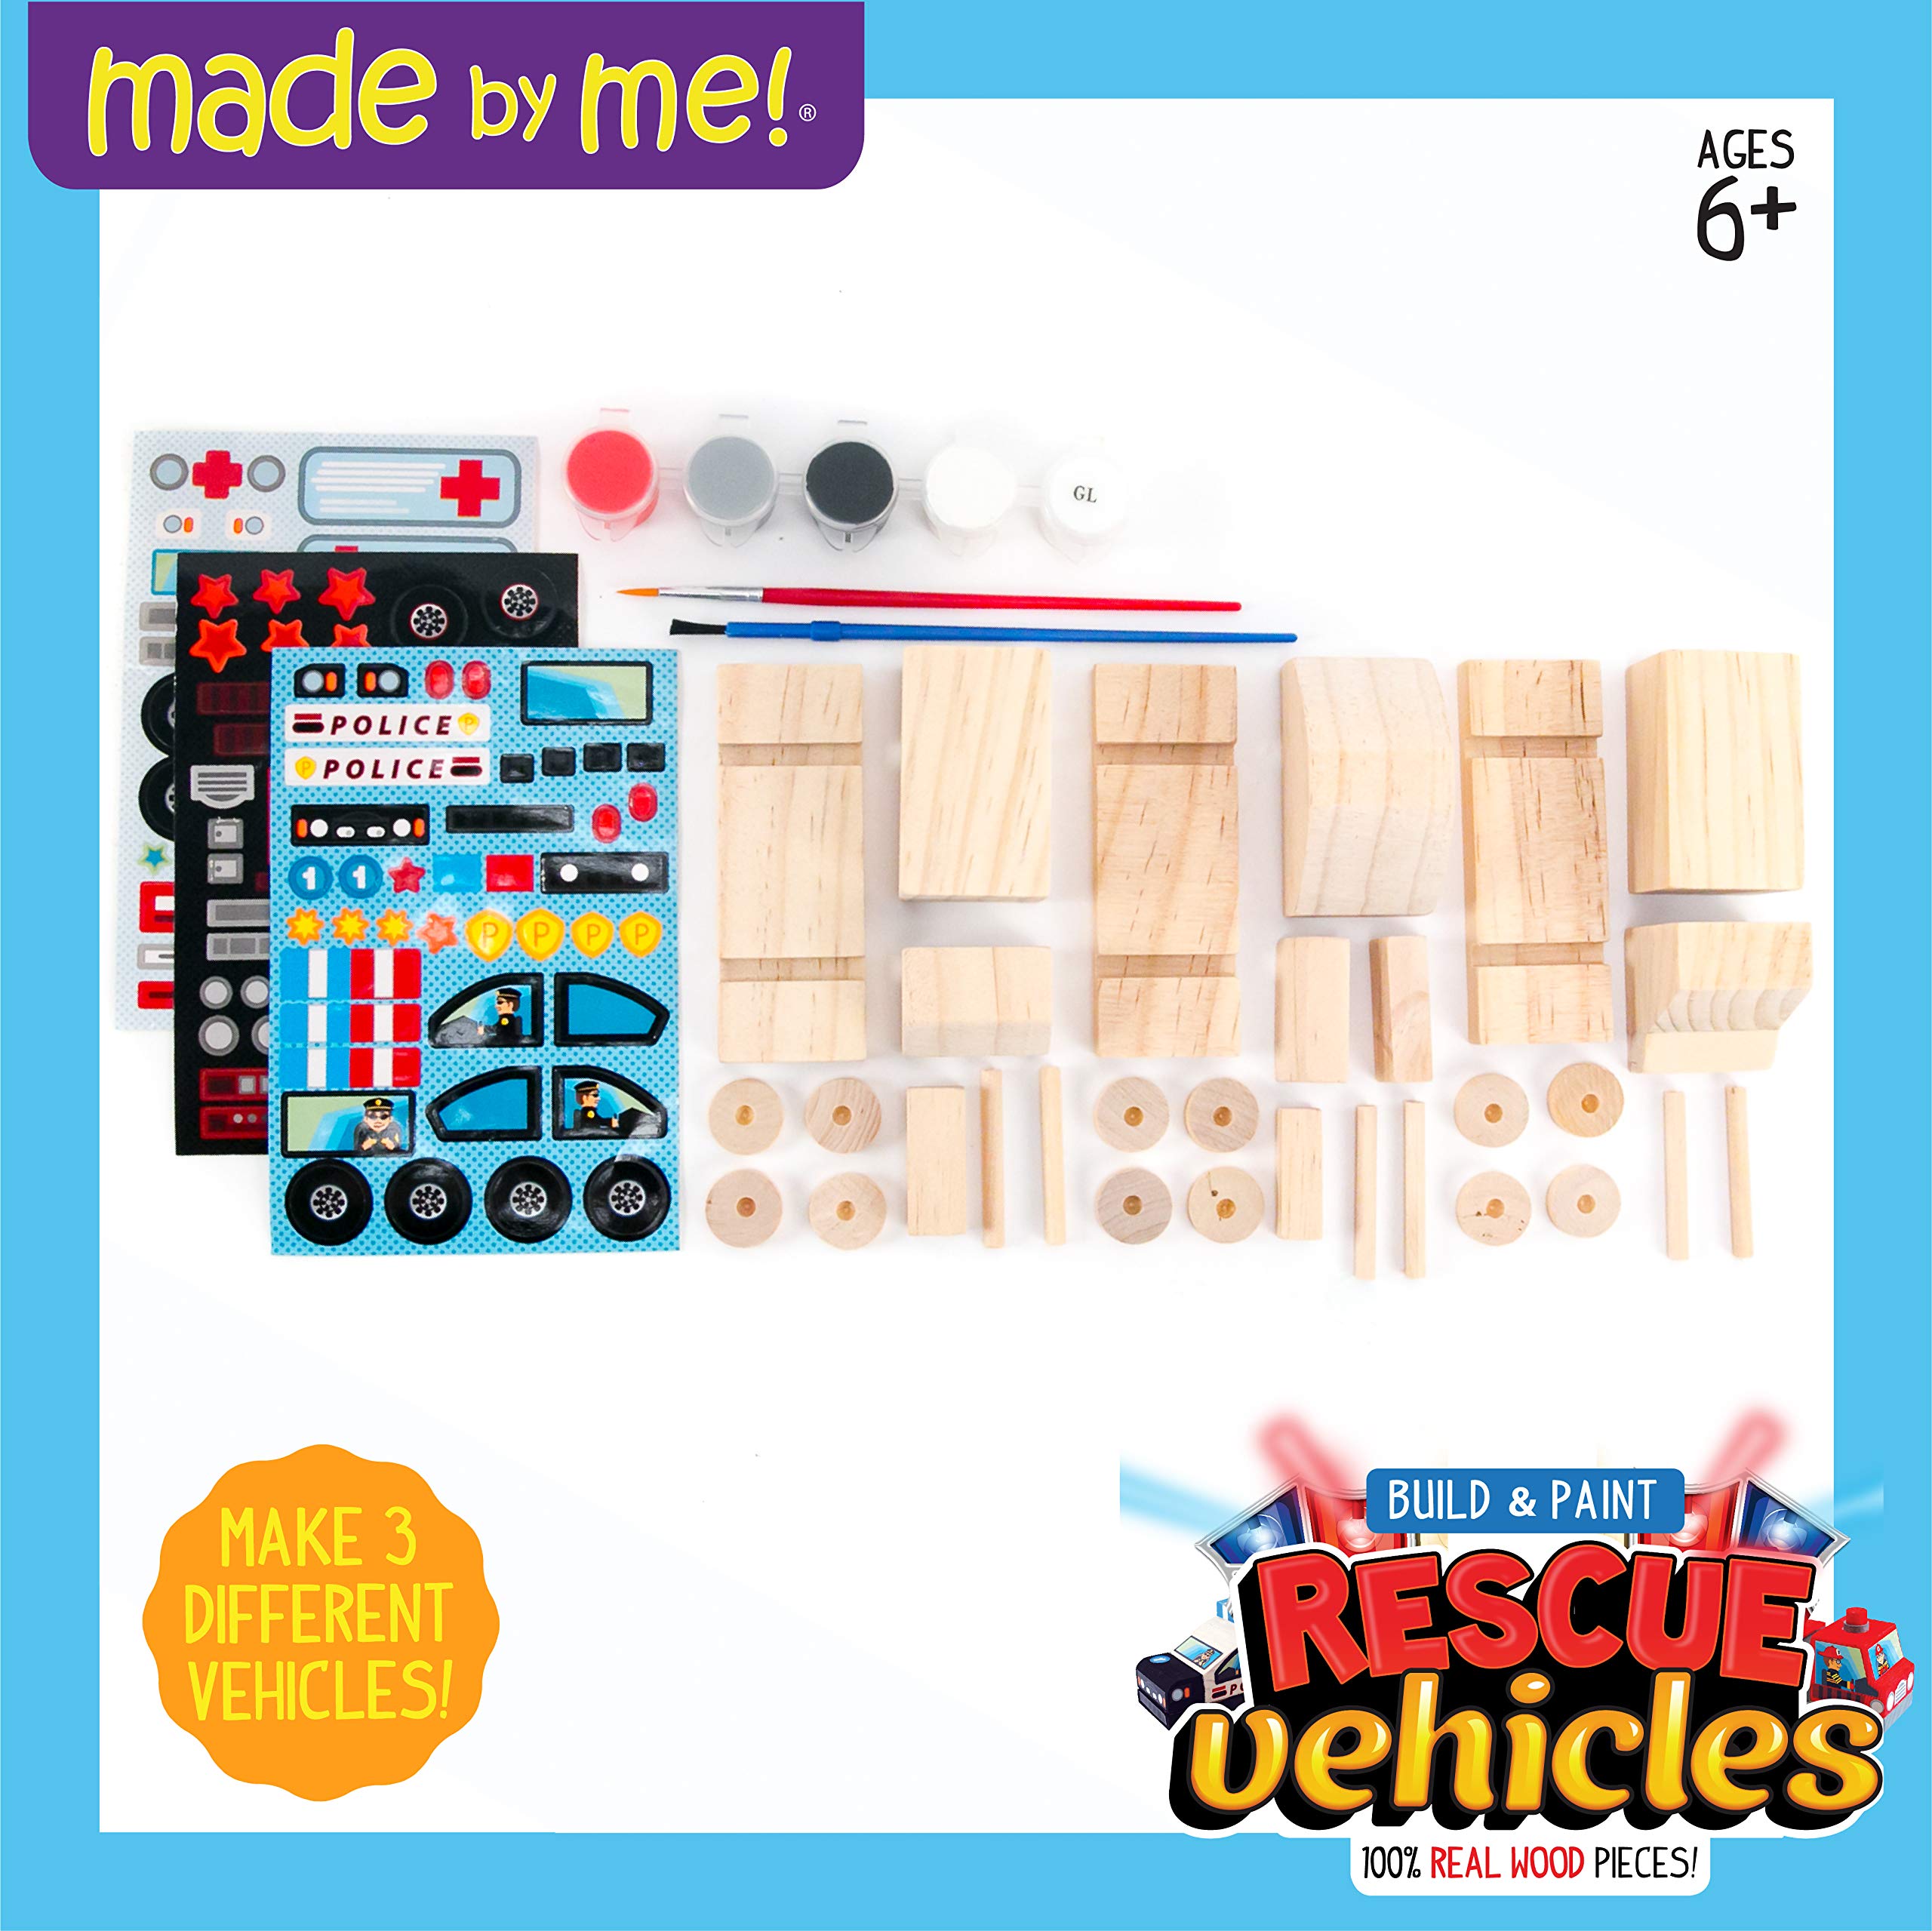 Made By Me Build & Paint Rescue Vehicles, Paint Your Own Firetruck, Police Car & Ambulance, DIY Wooden Vehicles, Great Weekend Activity, Car Birthday Party Idea For Kids Ages 6, 7, 8, 9